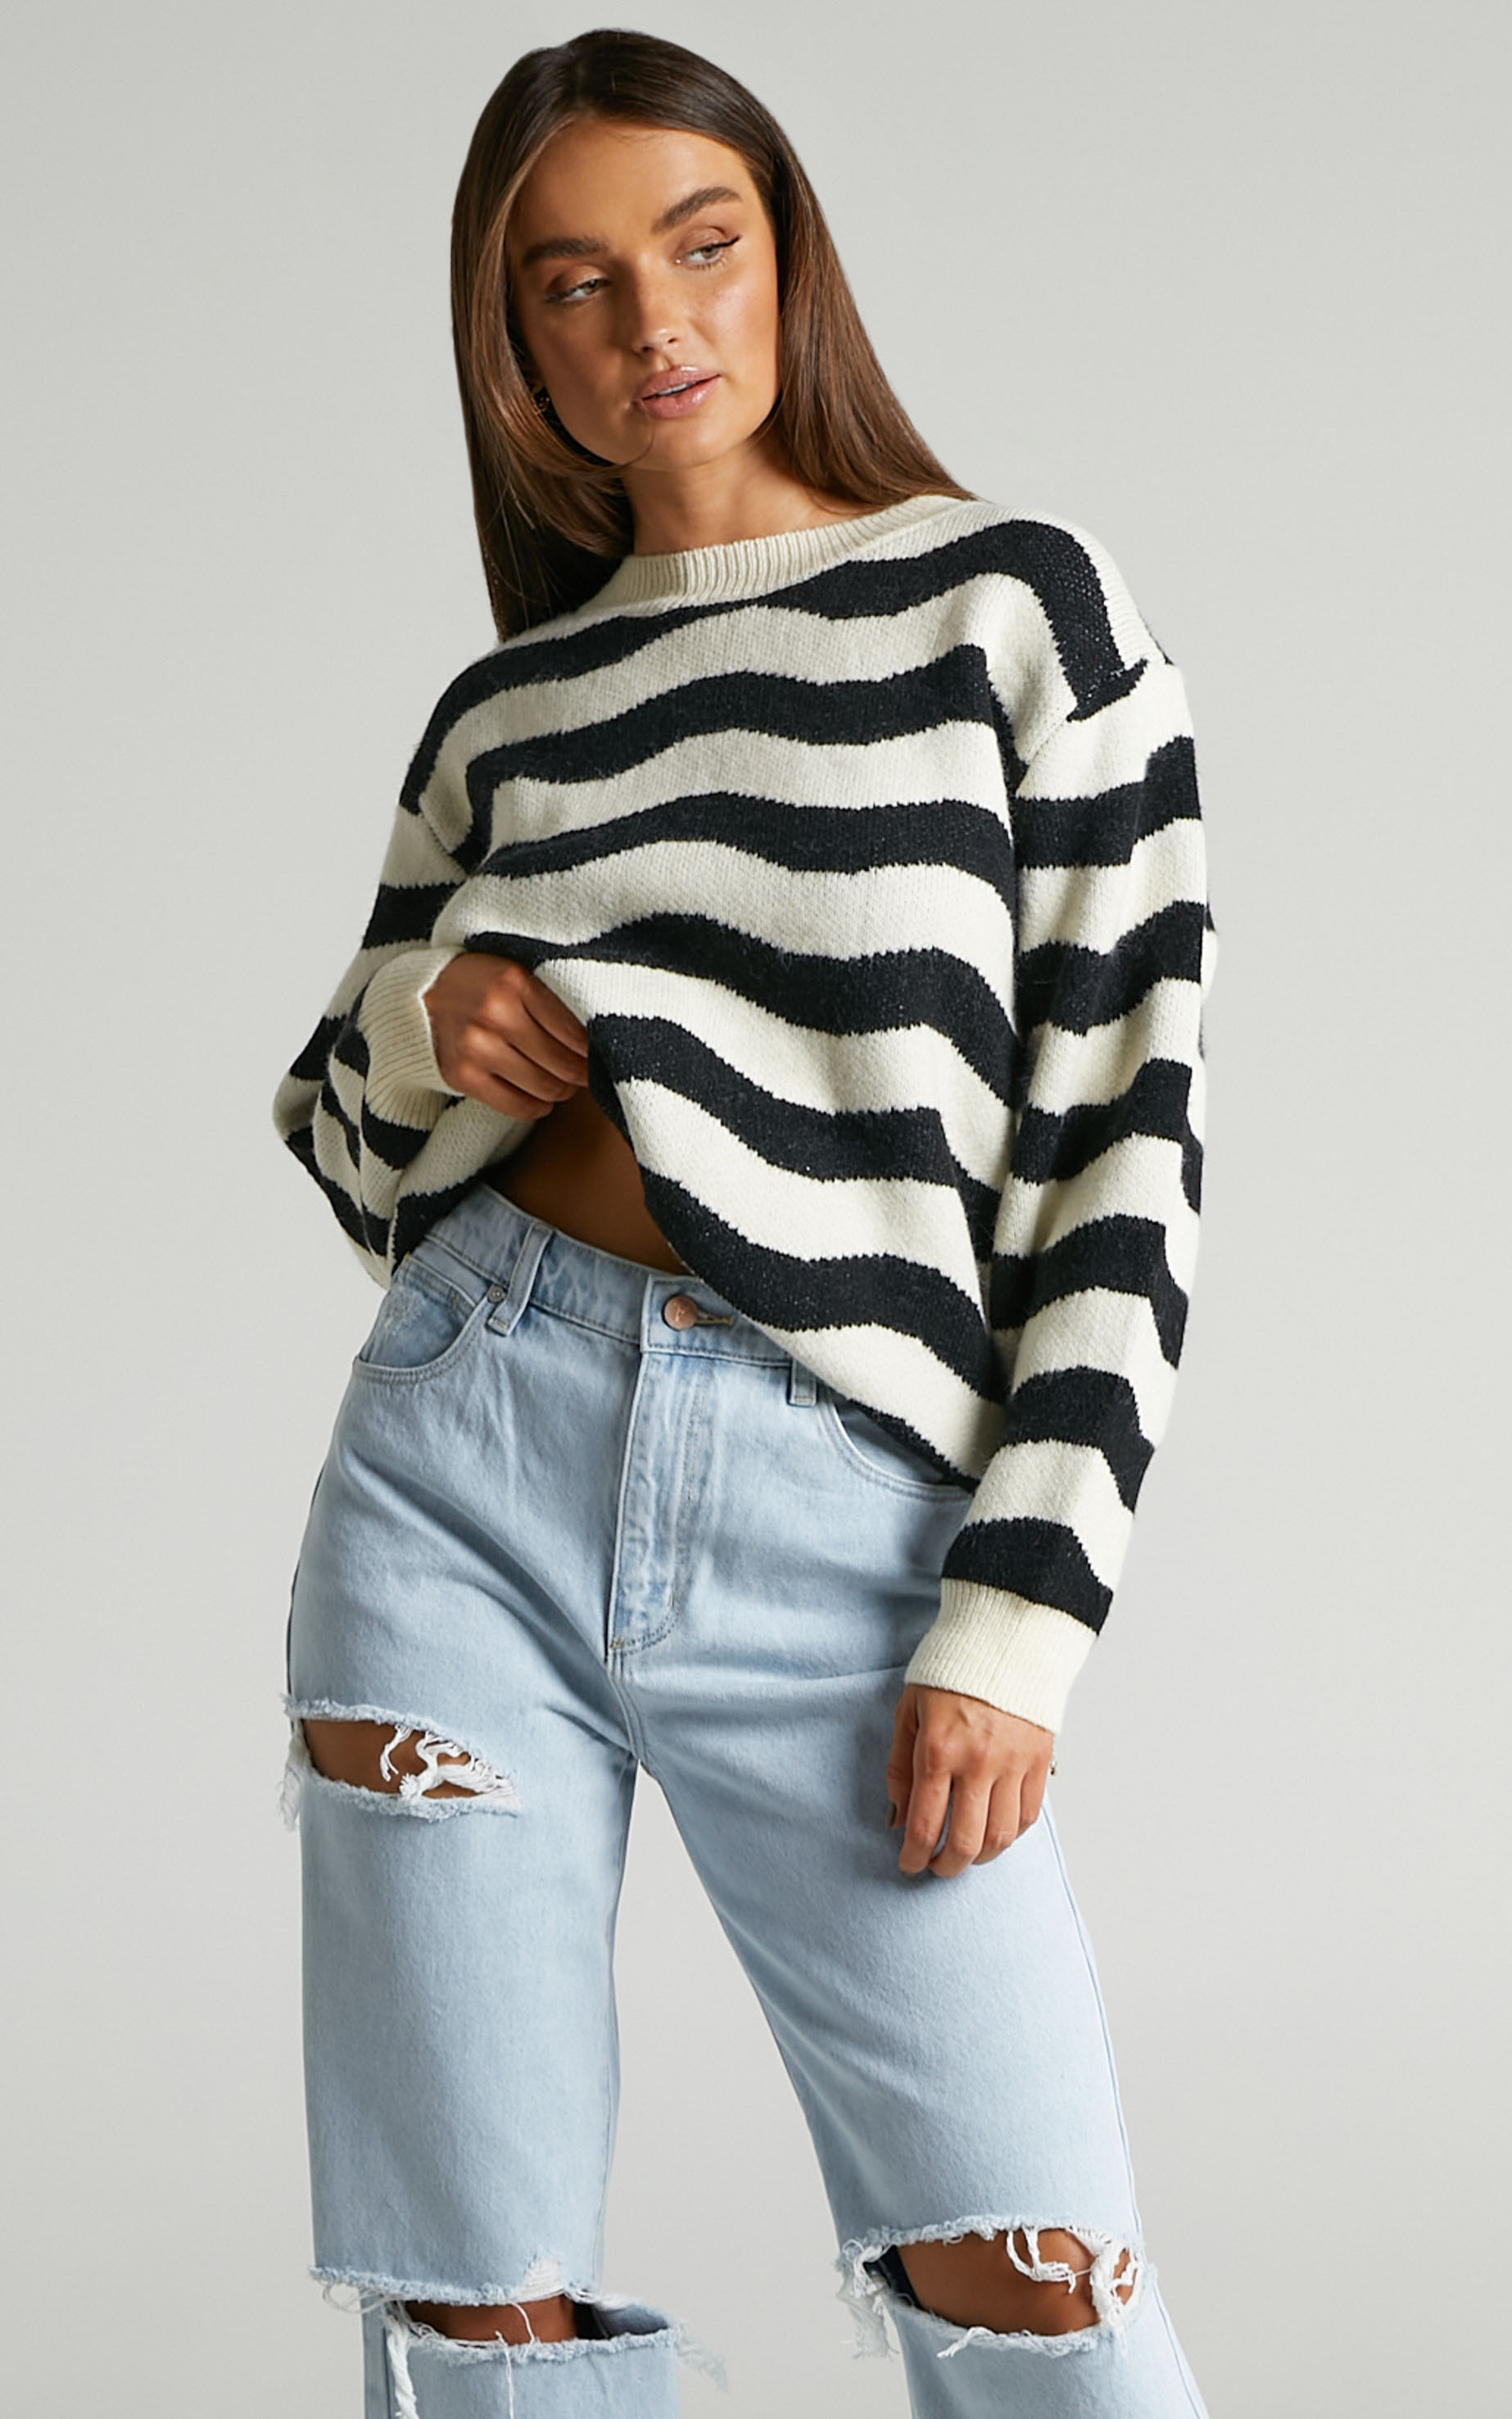 Meredith Oversized Striped Knit Jumper in Cream/Black - L, CRE1, hi-res image number null